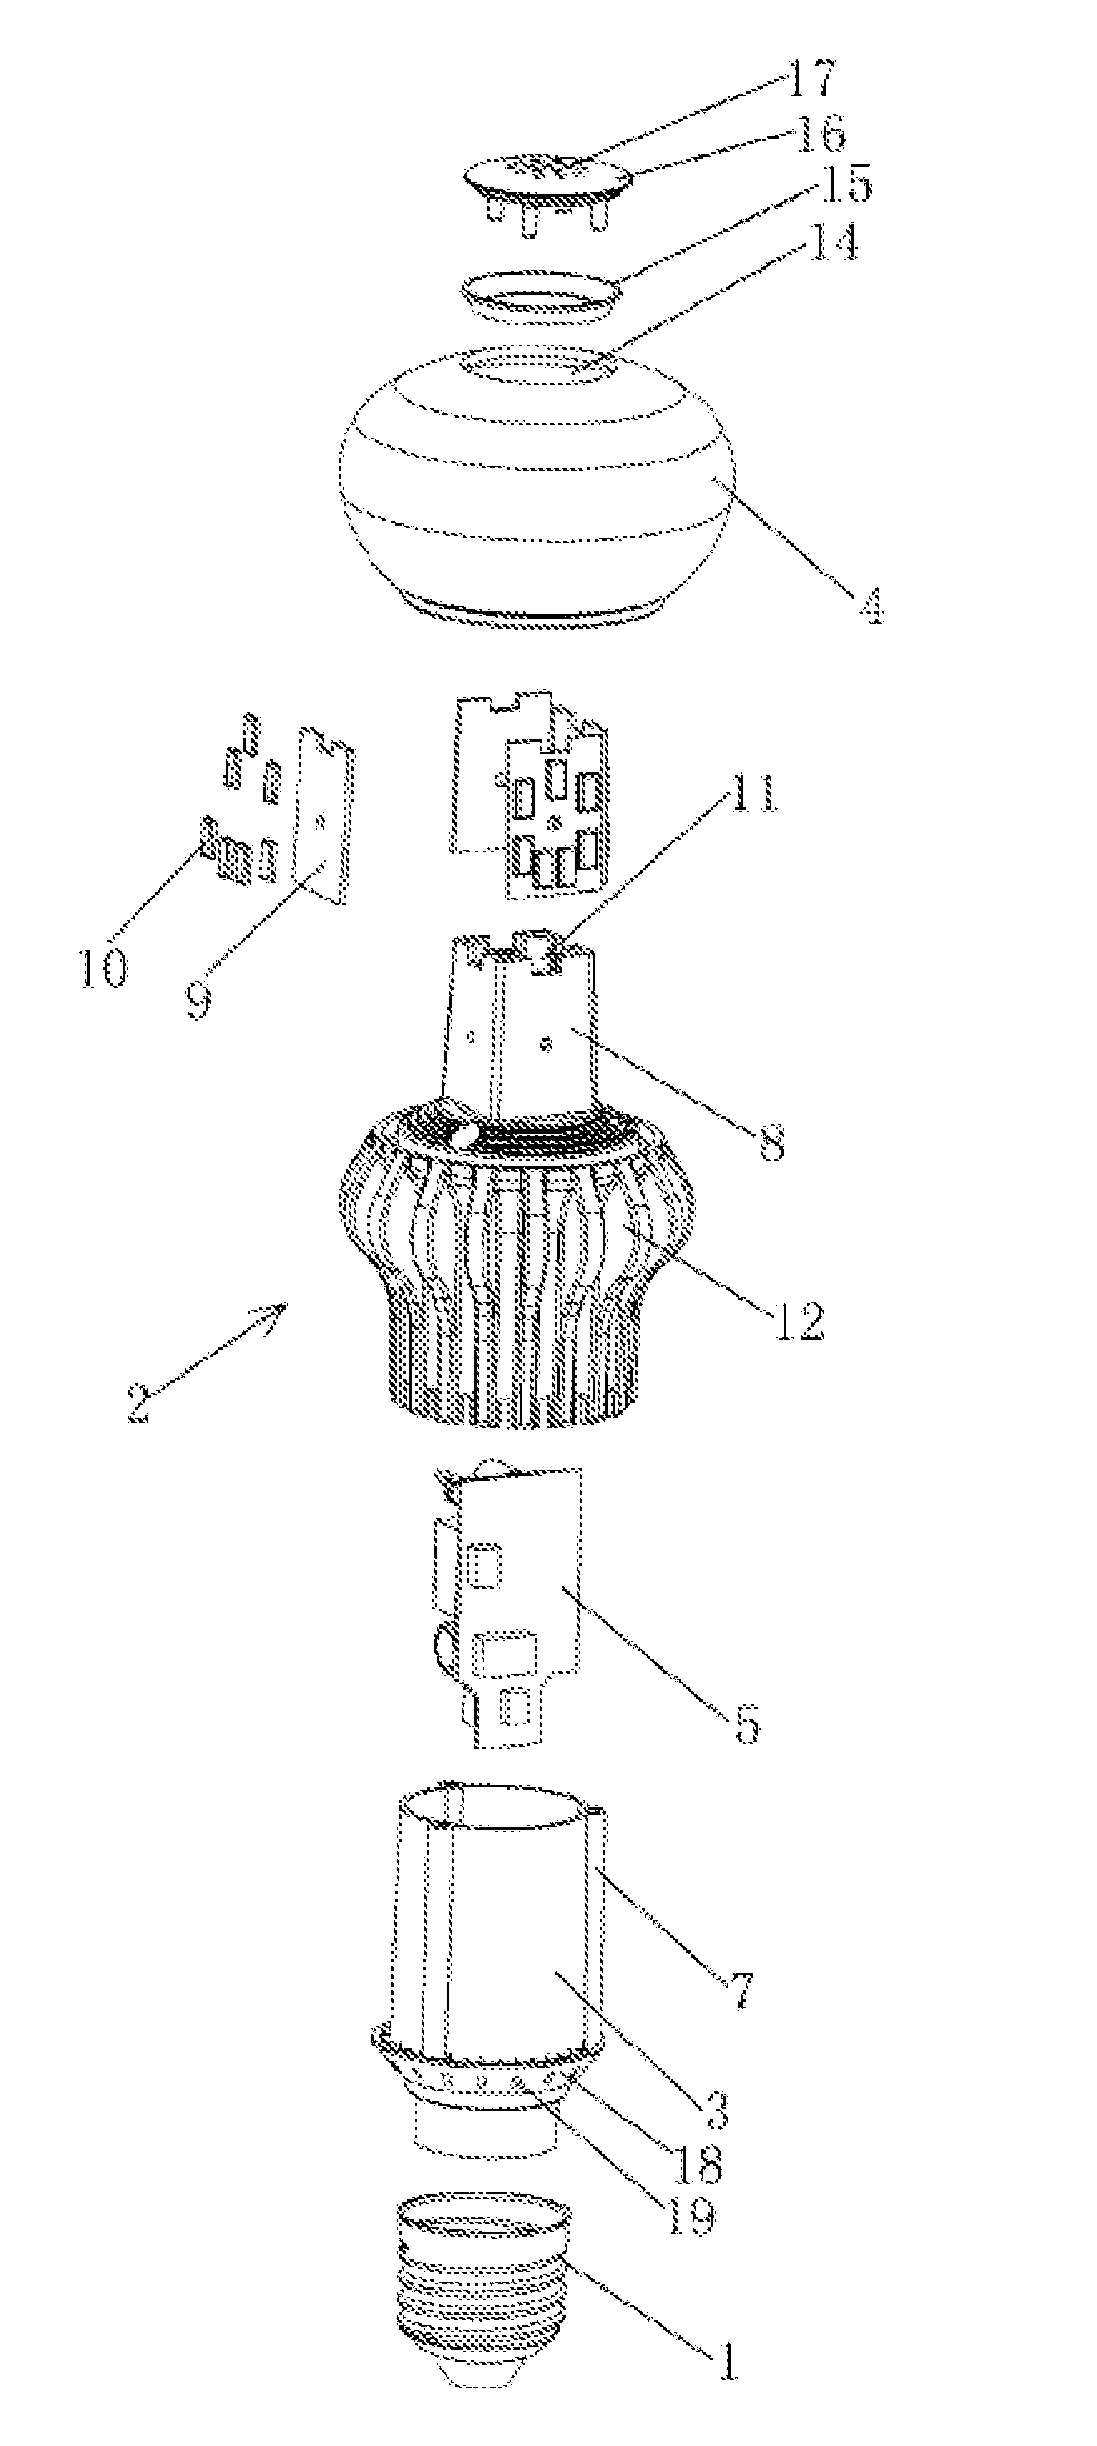 LED lighting device including heat dissipation structure and method for making the same